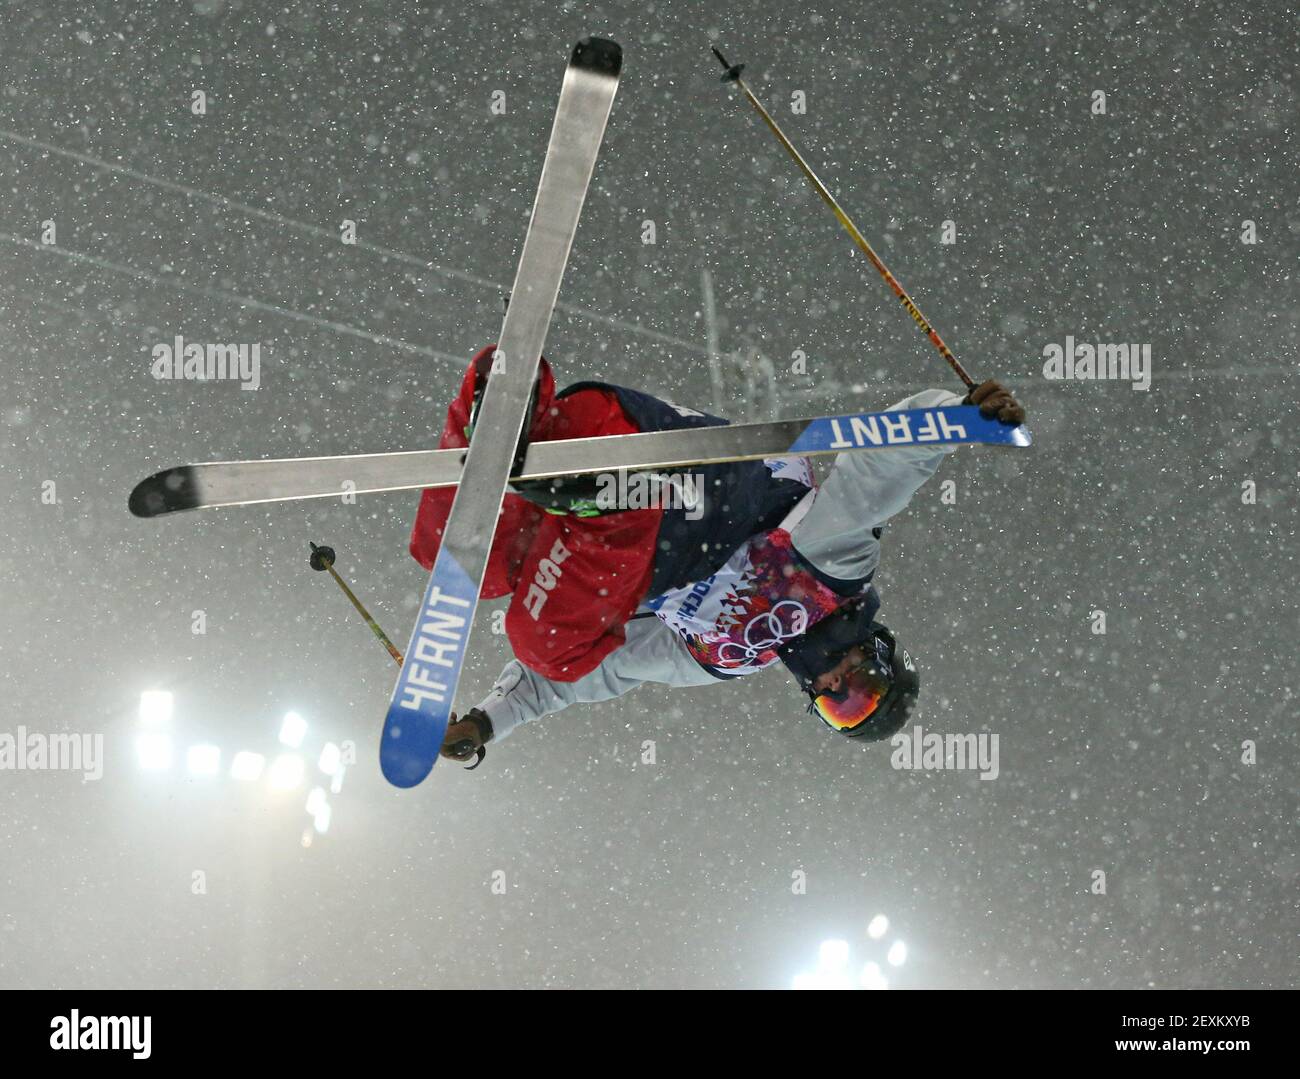 David Wise of the USA competes in qualifying for the men's ski halfpipe at Rosa Khutor Extreme Park during the Winter Olympics in Sochi, Russia, Tuesday, Feb. 18, 2014. (Photo by Brian Cassella/Chicago Tribune/MCT/Sipa USA) Stock Photo